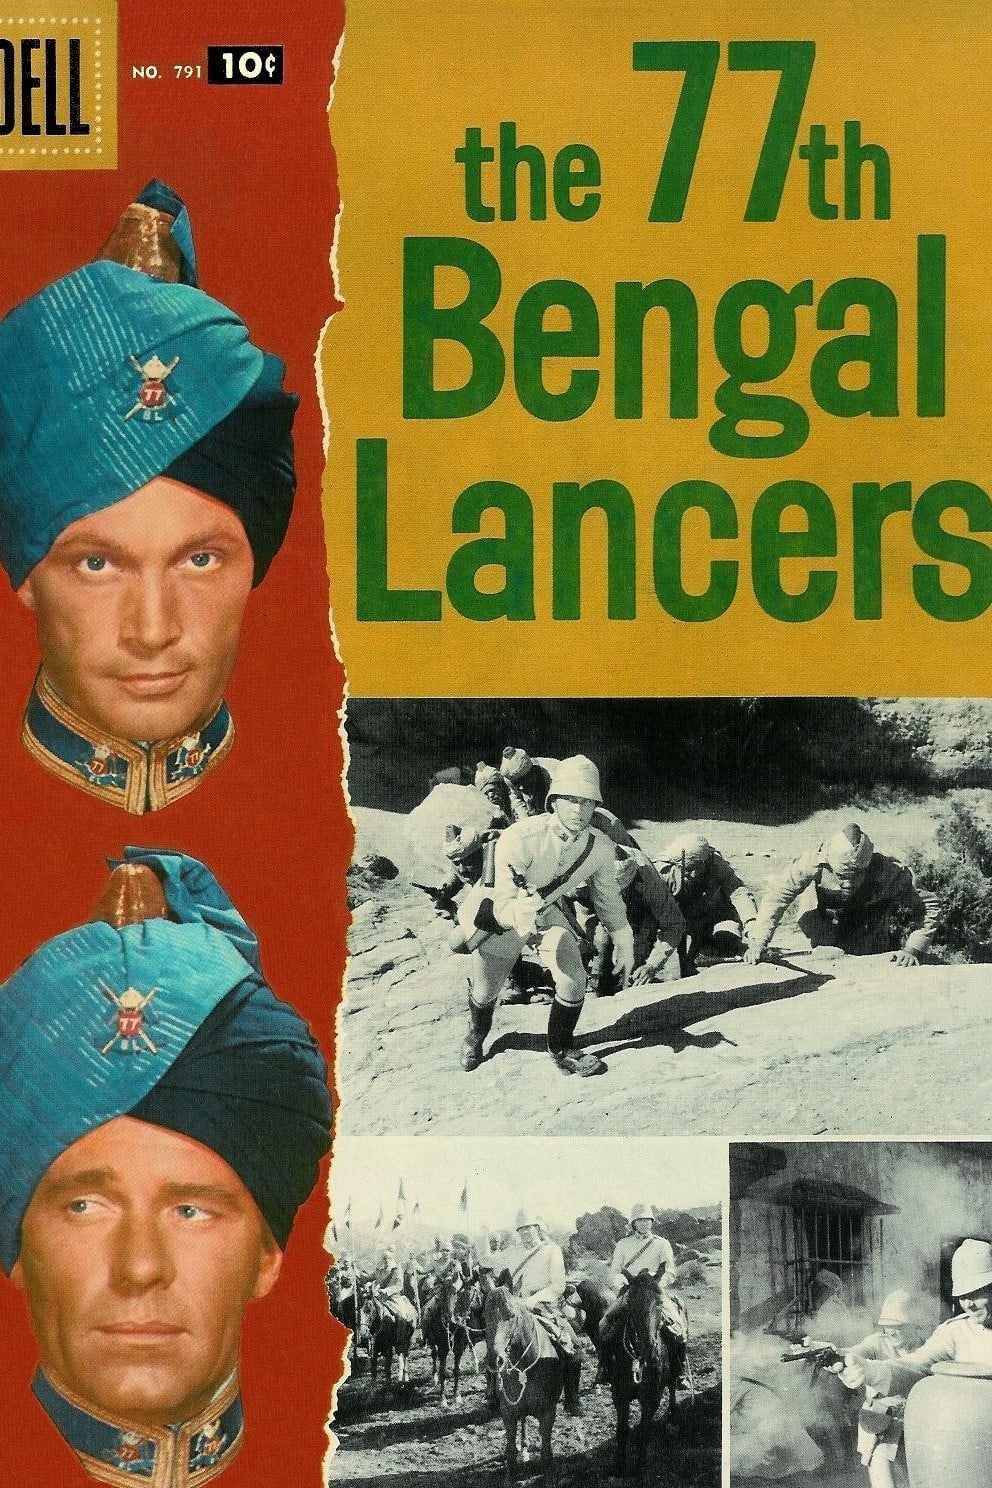 Tales of the 77th Bengal Lancers (1956)